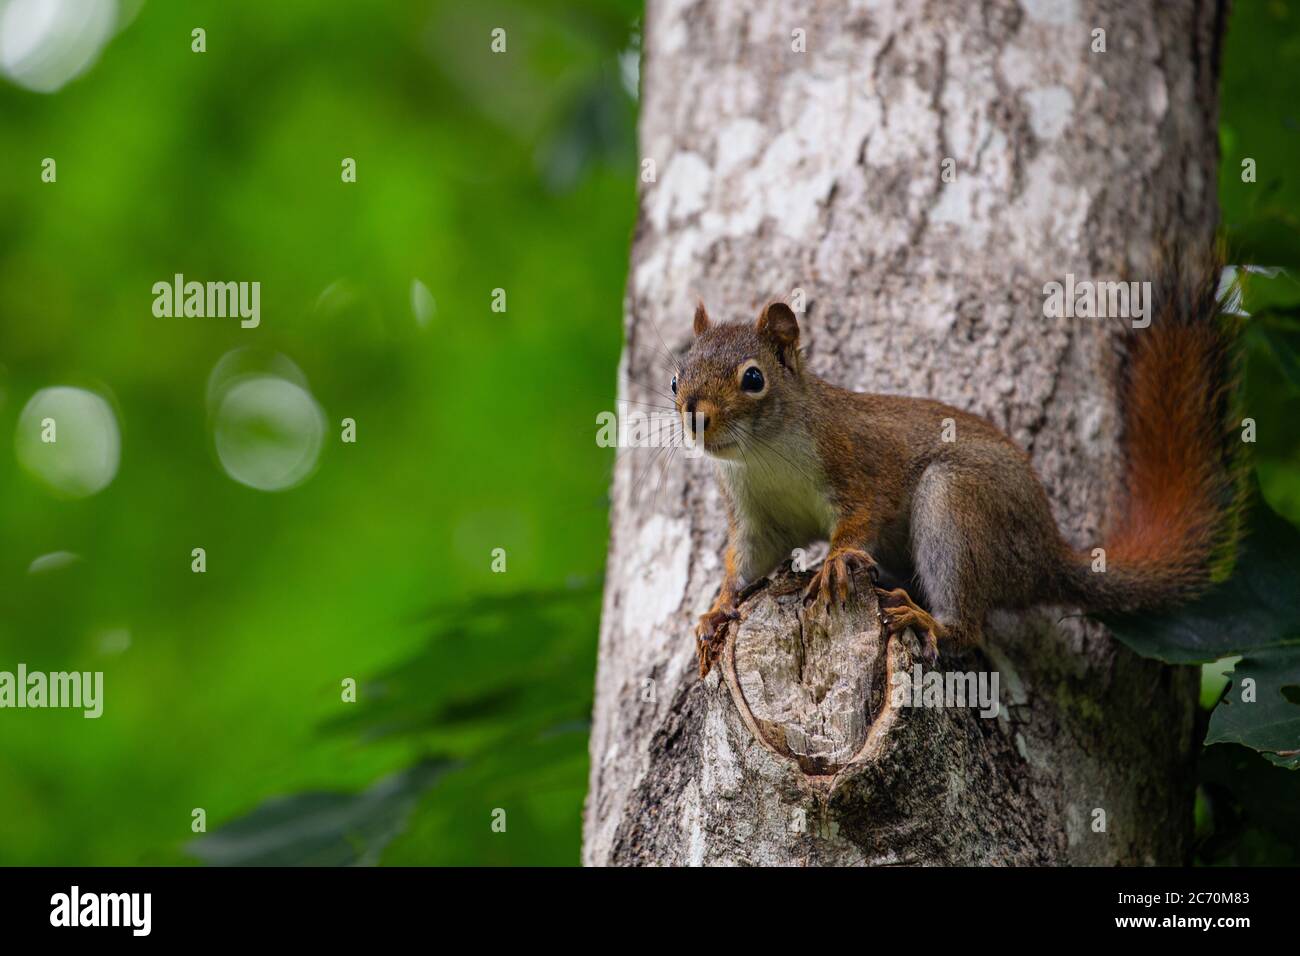 Red squirrel perched on branch of tree. Stock Photo